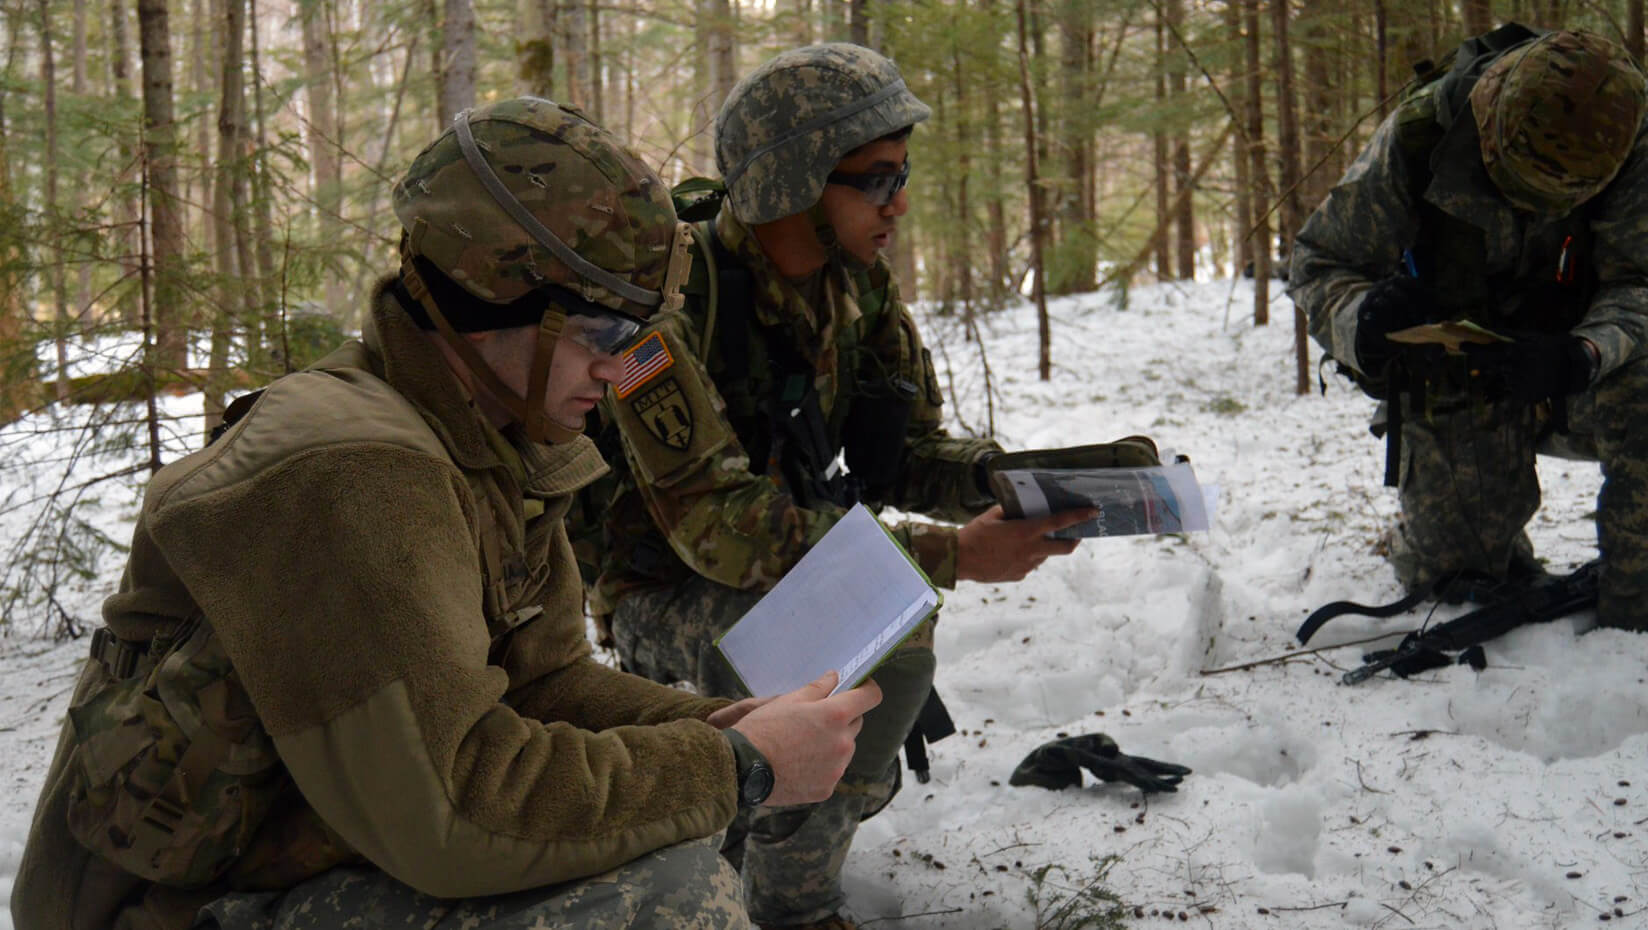 UMaine ROTC cadets in the woods